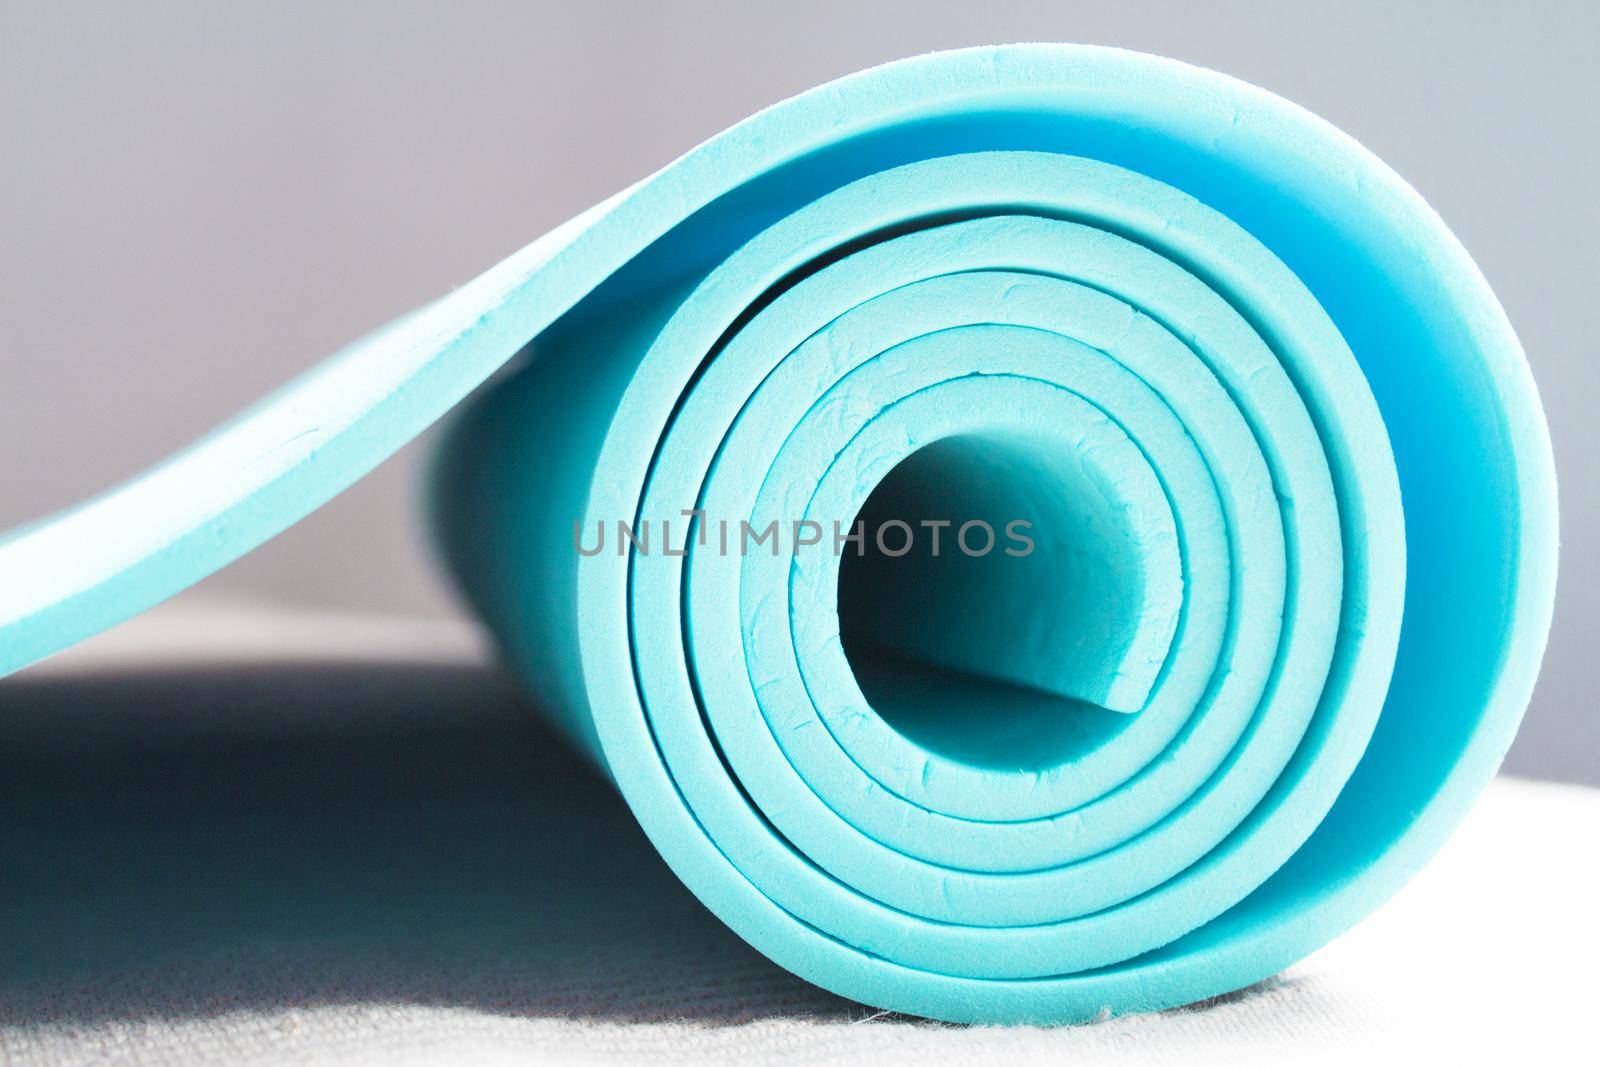 Mat for practicing yoga, pilates and stretching exercises by GemaIbarra